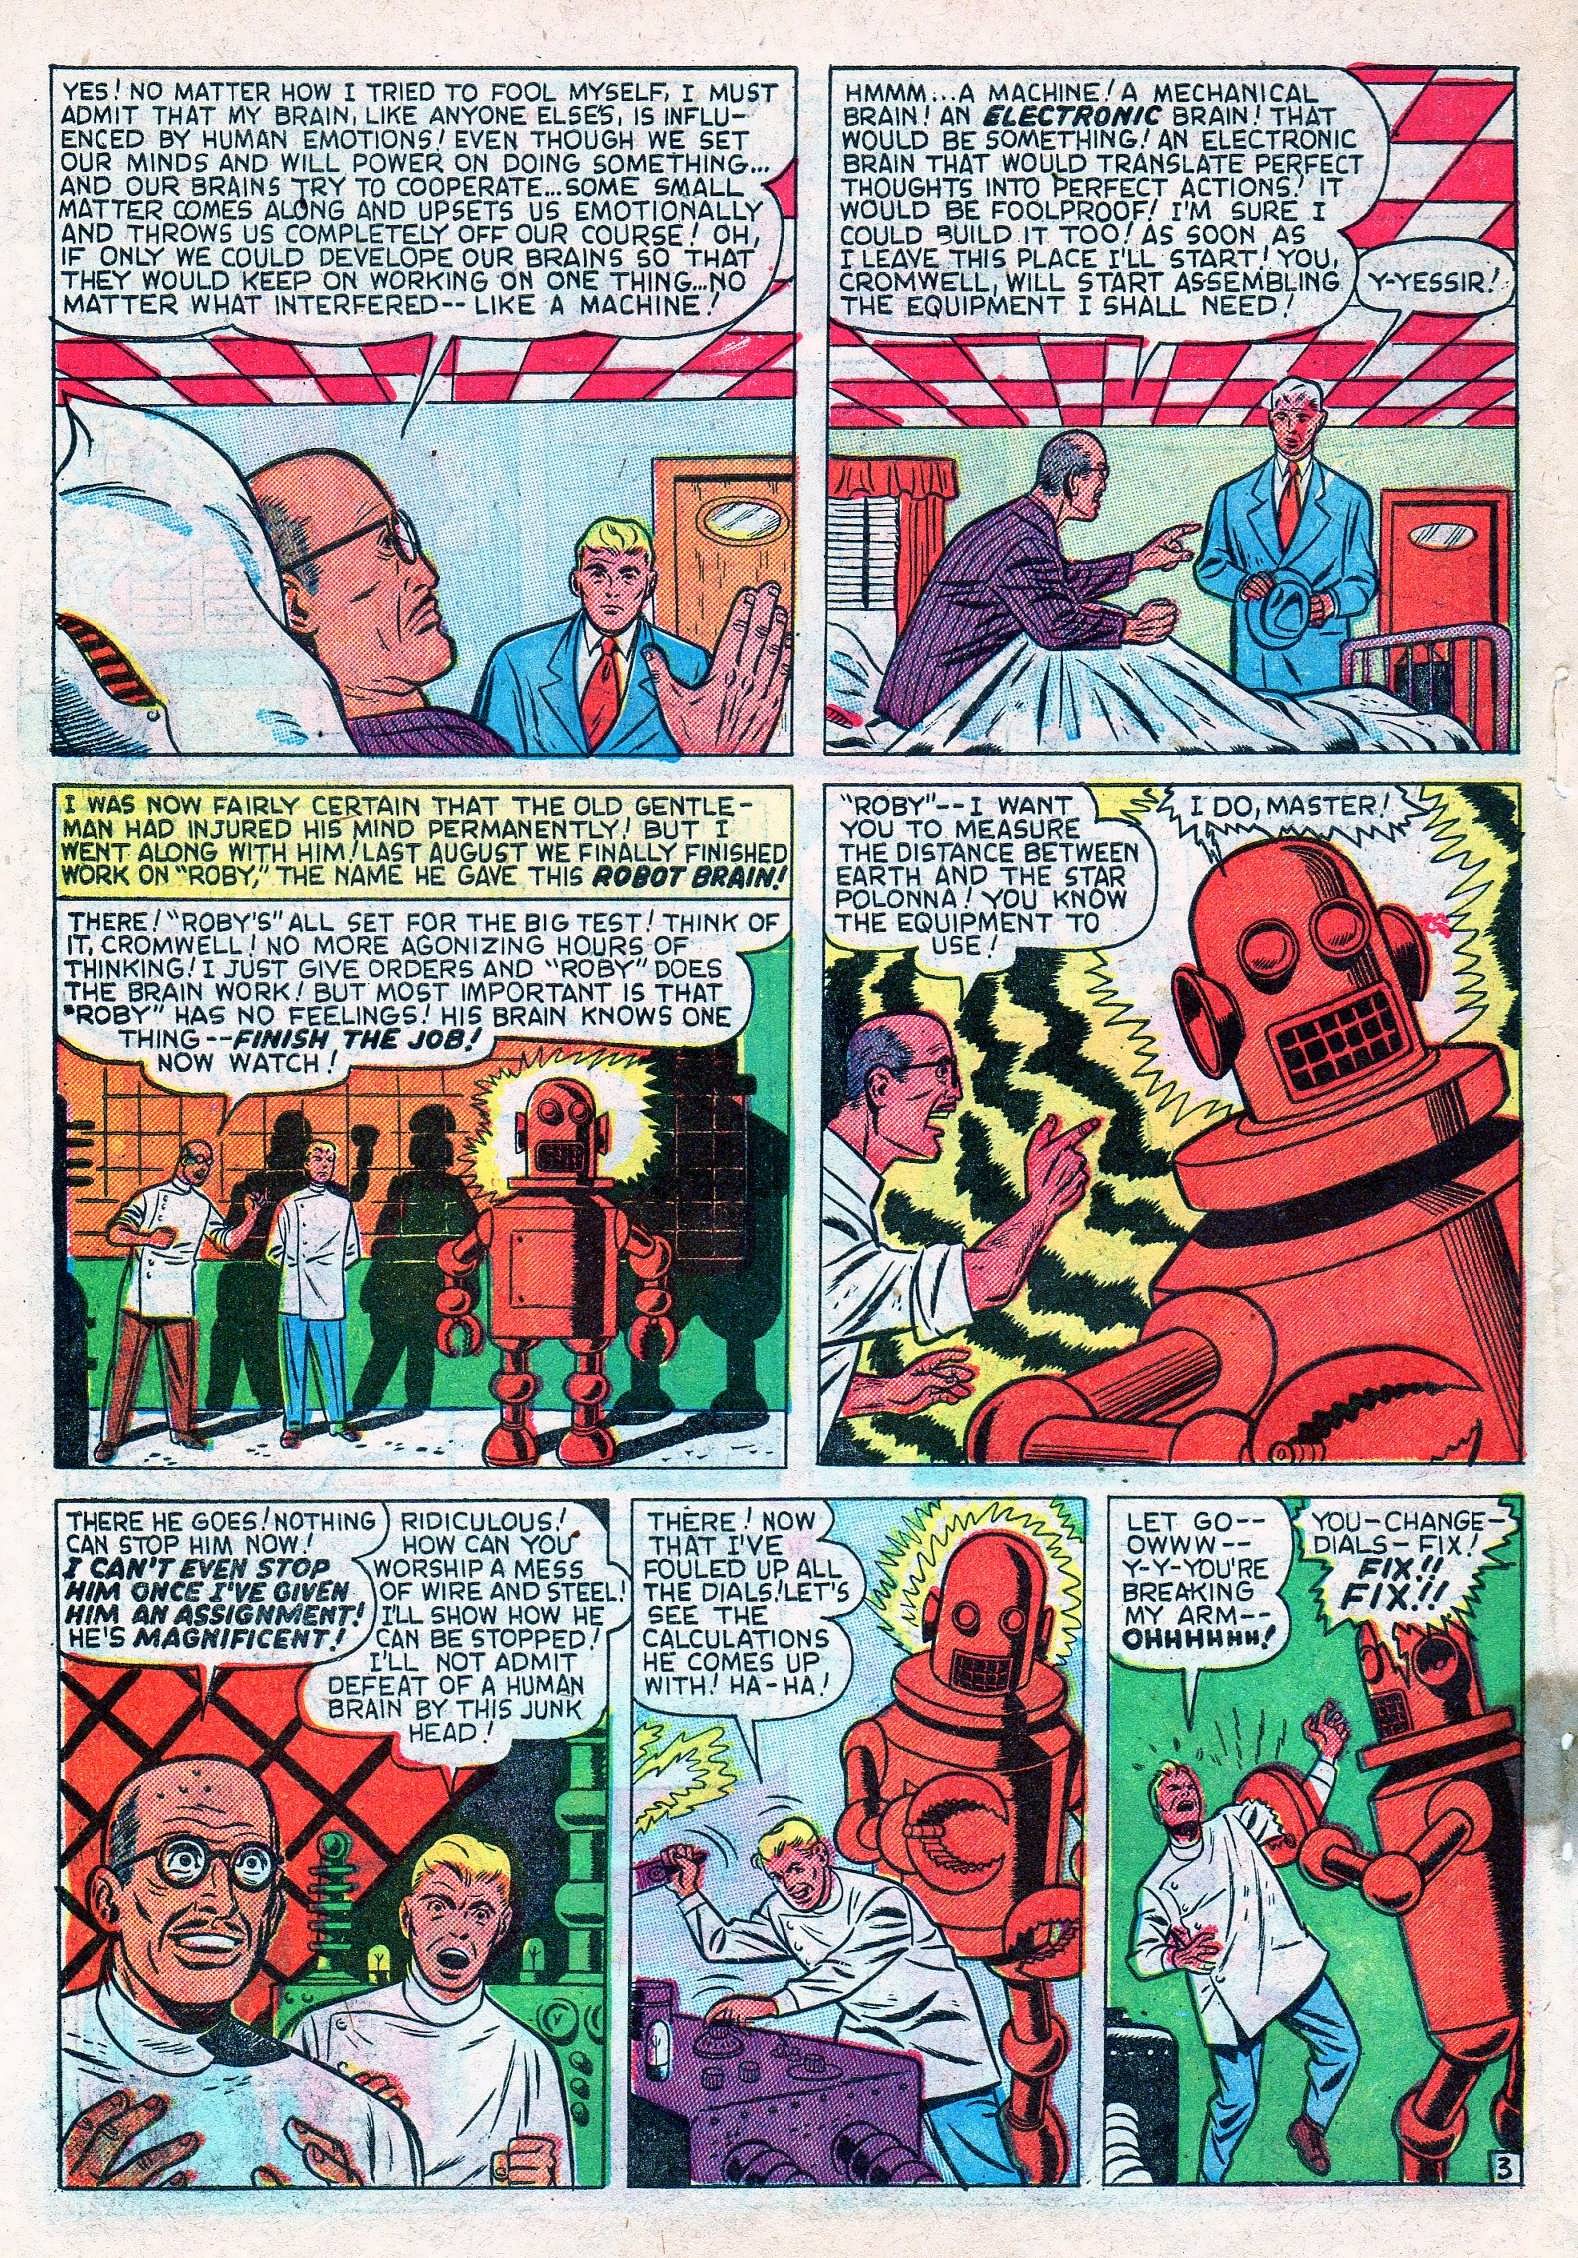 Marvel Tales (1949) 99 Page 29